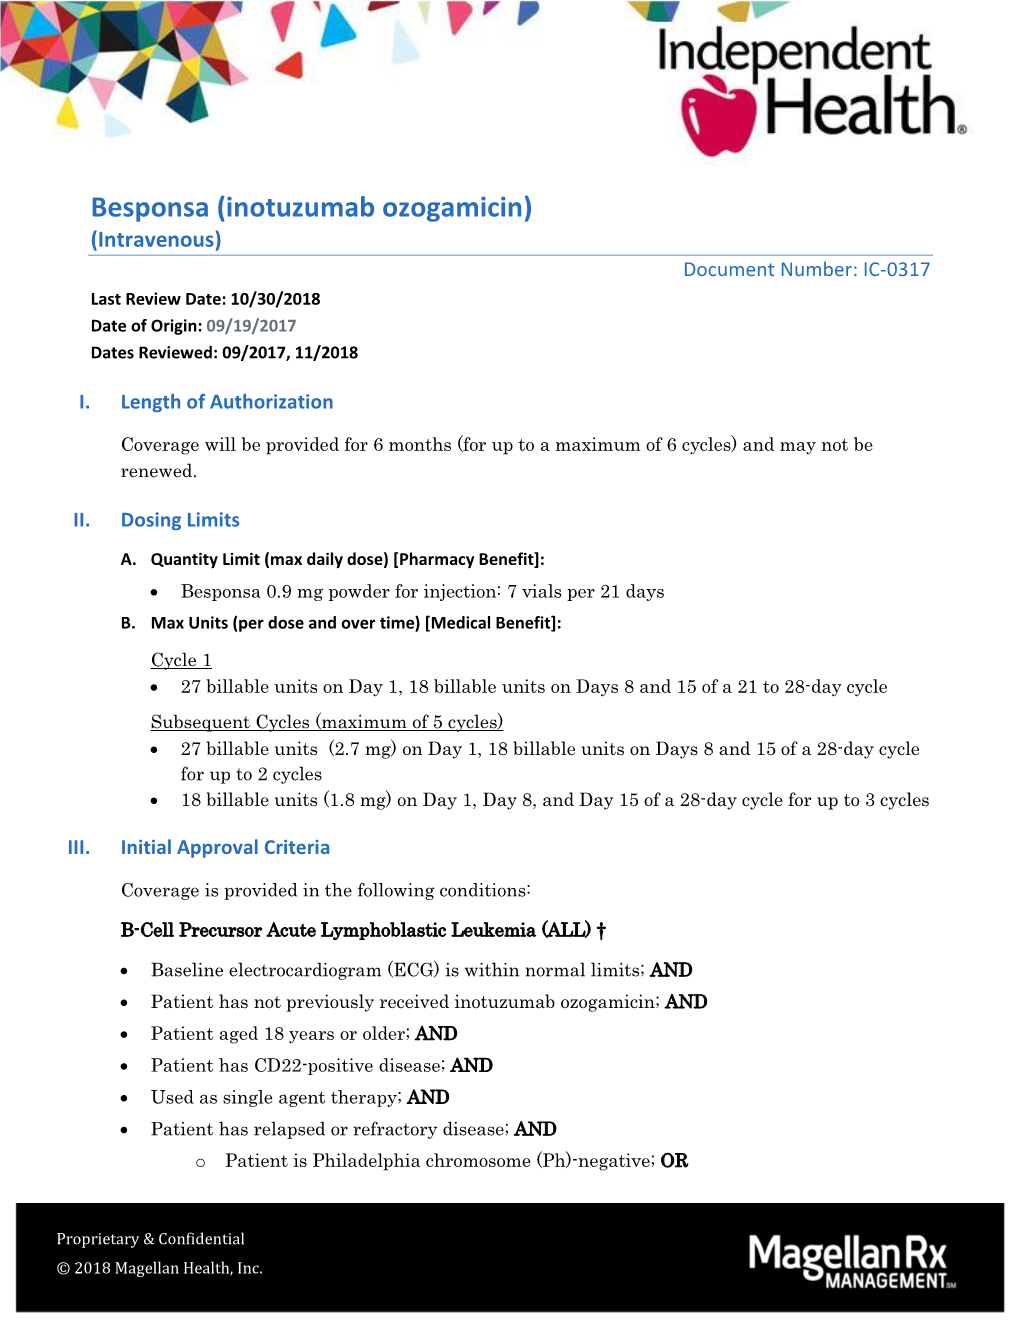 Besponsa (Inotuzumab Ozogamicin) (Intravenous) Document Number: IC-0317 Last Review Date: 10/30/2018 Date of Origin: 09/19/2017 Dates Reviewed: 09/2017, 11/2018